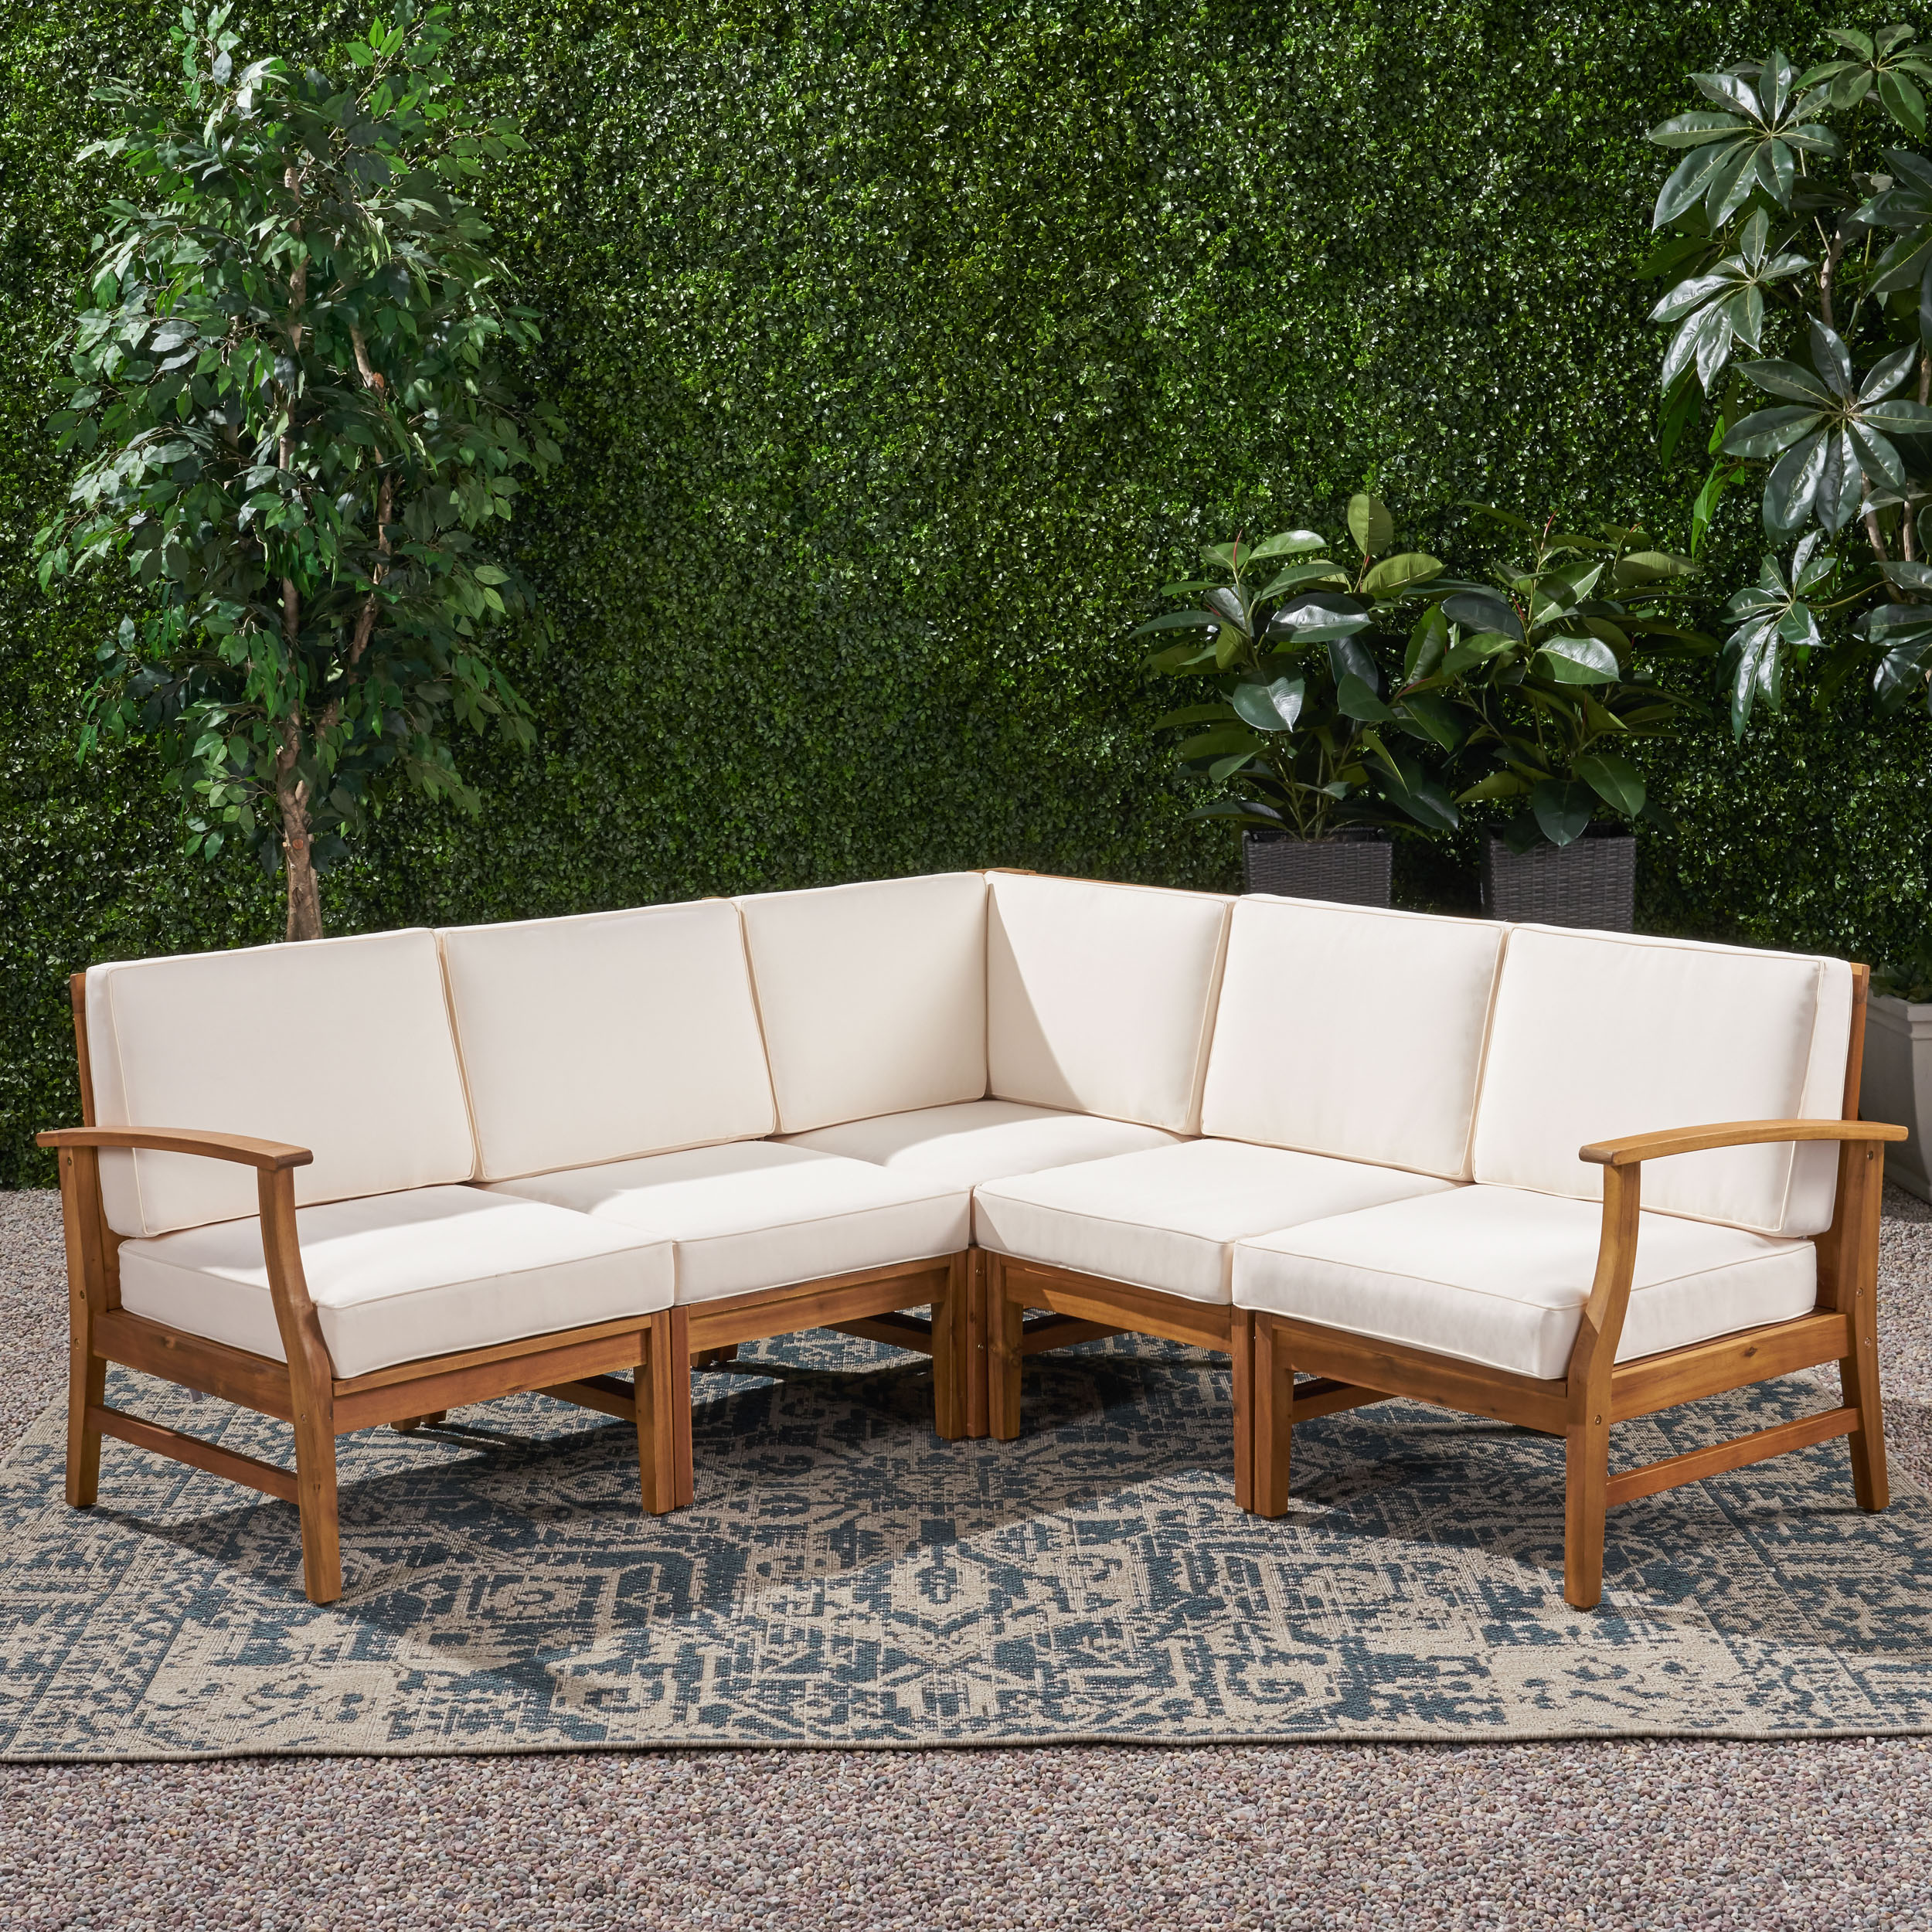 Hermosa Outdoor 5 Piece Chat Set with Cushions (No Coffee Table), Teak Finish, Cream - image 2 of 8